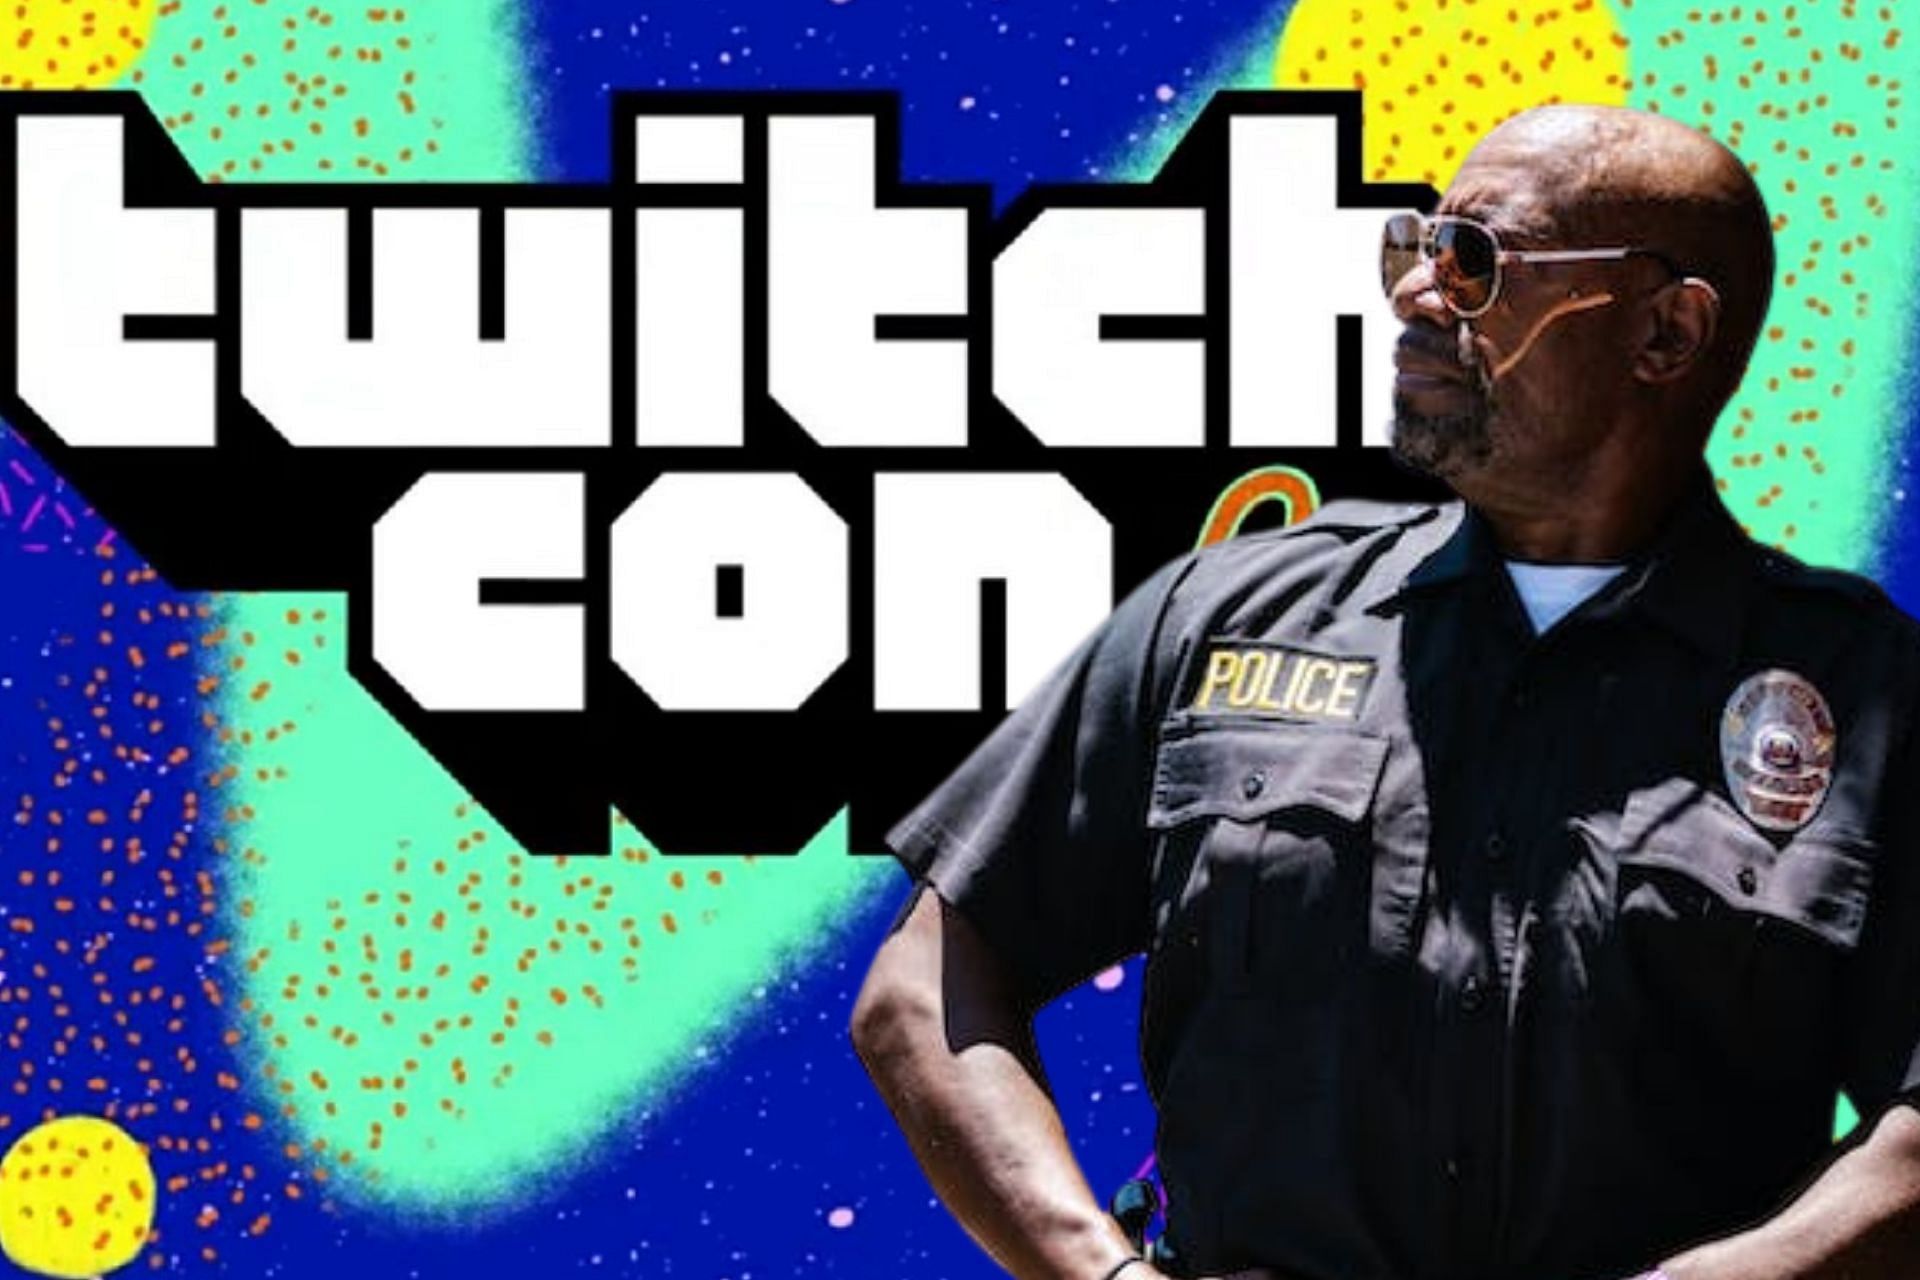 TwitchCon security personnel shares the experience monitoring and handling the attendees (Image via Sportkskeeda)